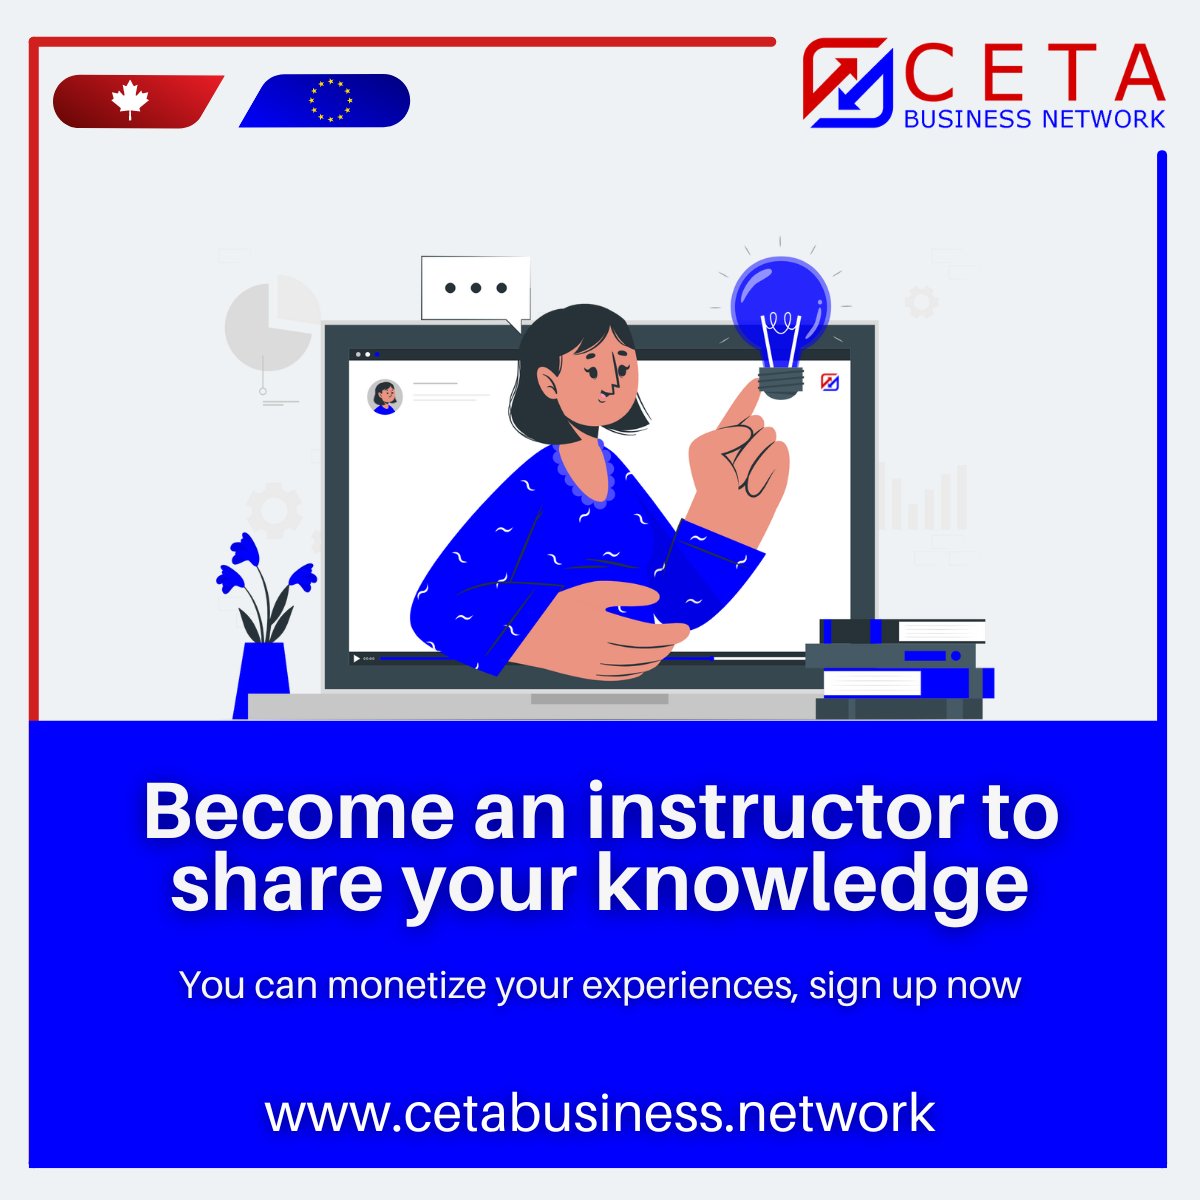 Discover the latest #business trends and best practices by taking #courses featured on the #CETABusinessNetwork's #course section. Plus, become an #instructor and earn by sharing your knowledge! 
cetabusiness.network/learning/

#BusinessTrends #BestPractices